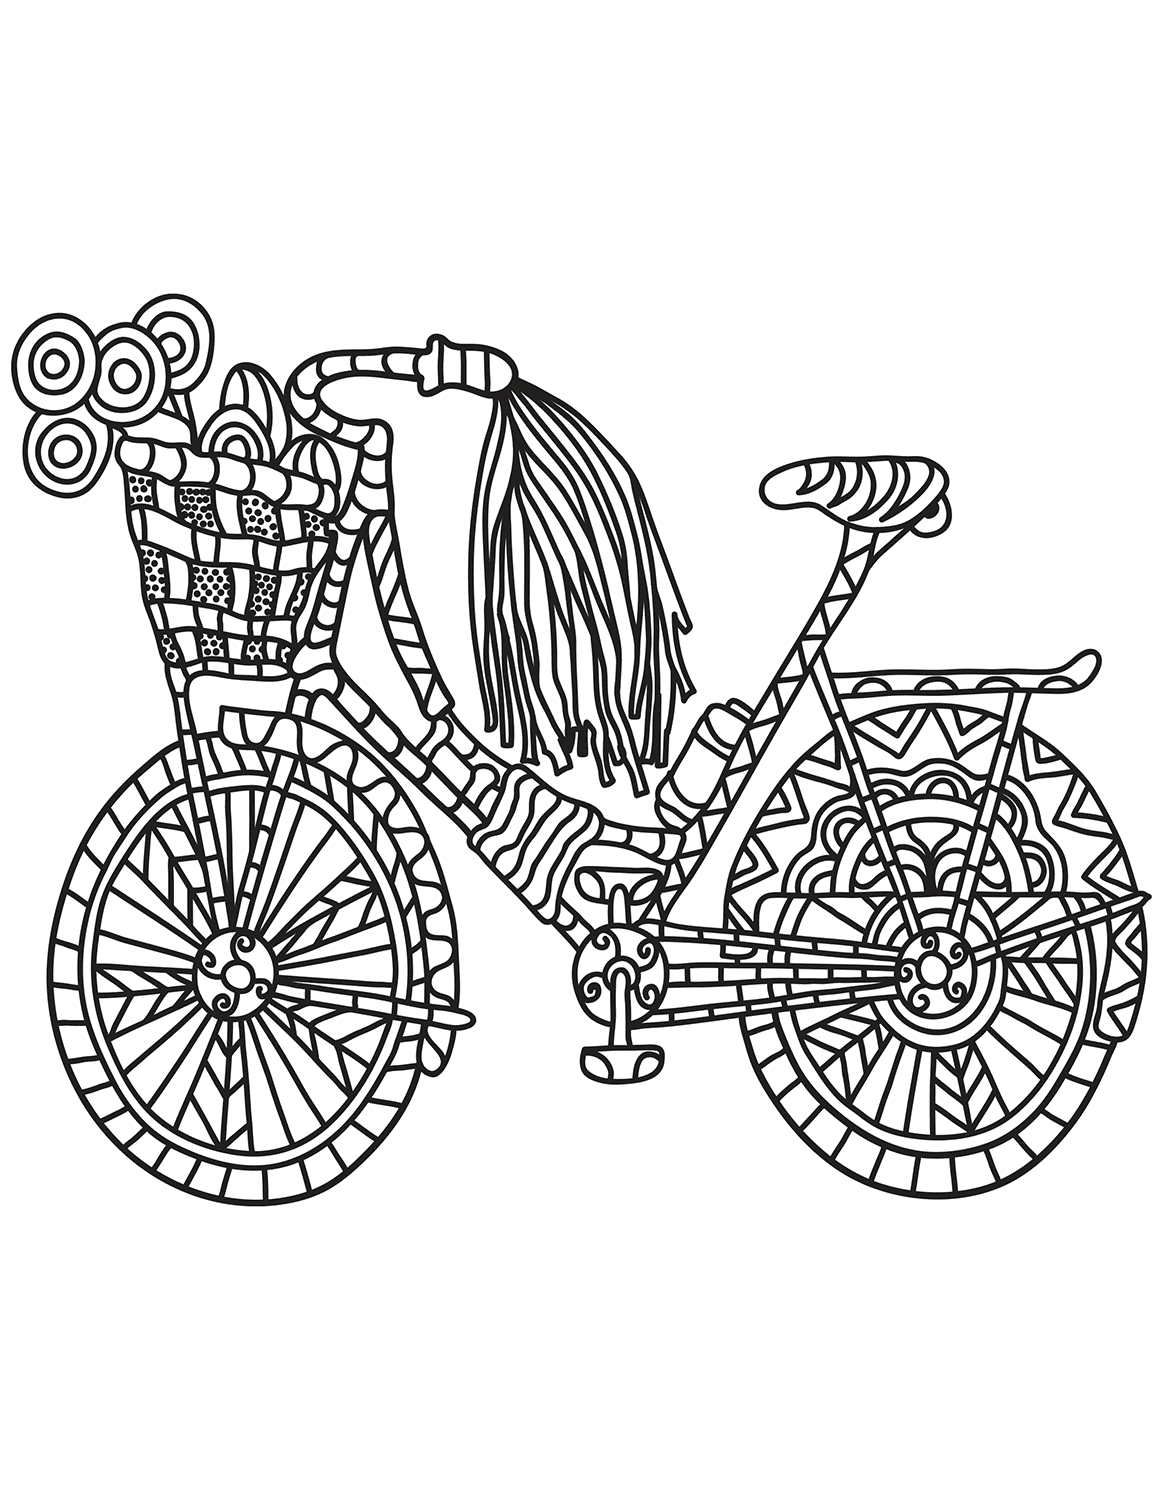 Bicycle For Kids Coloring Page